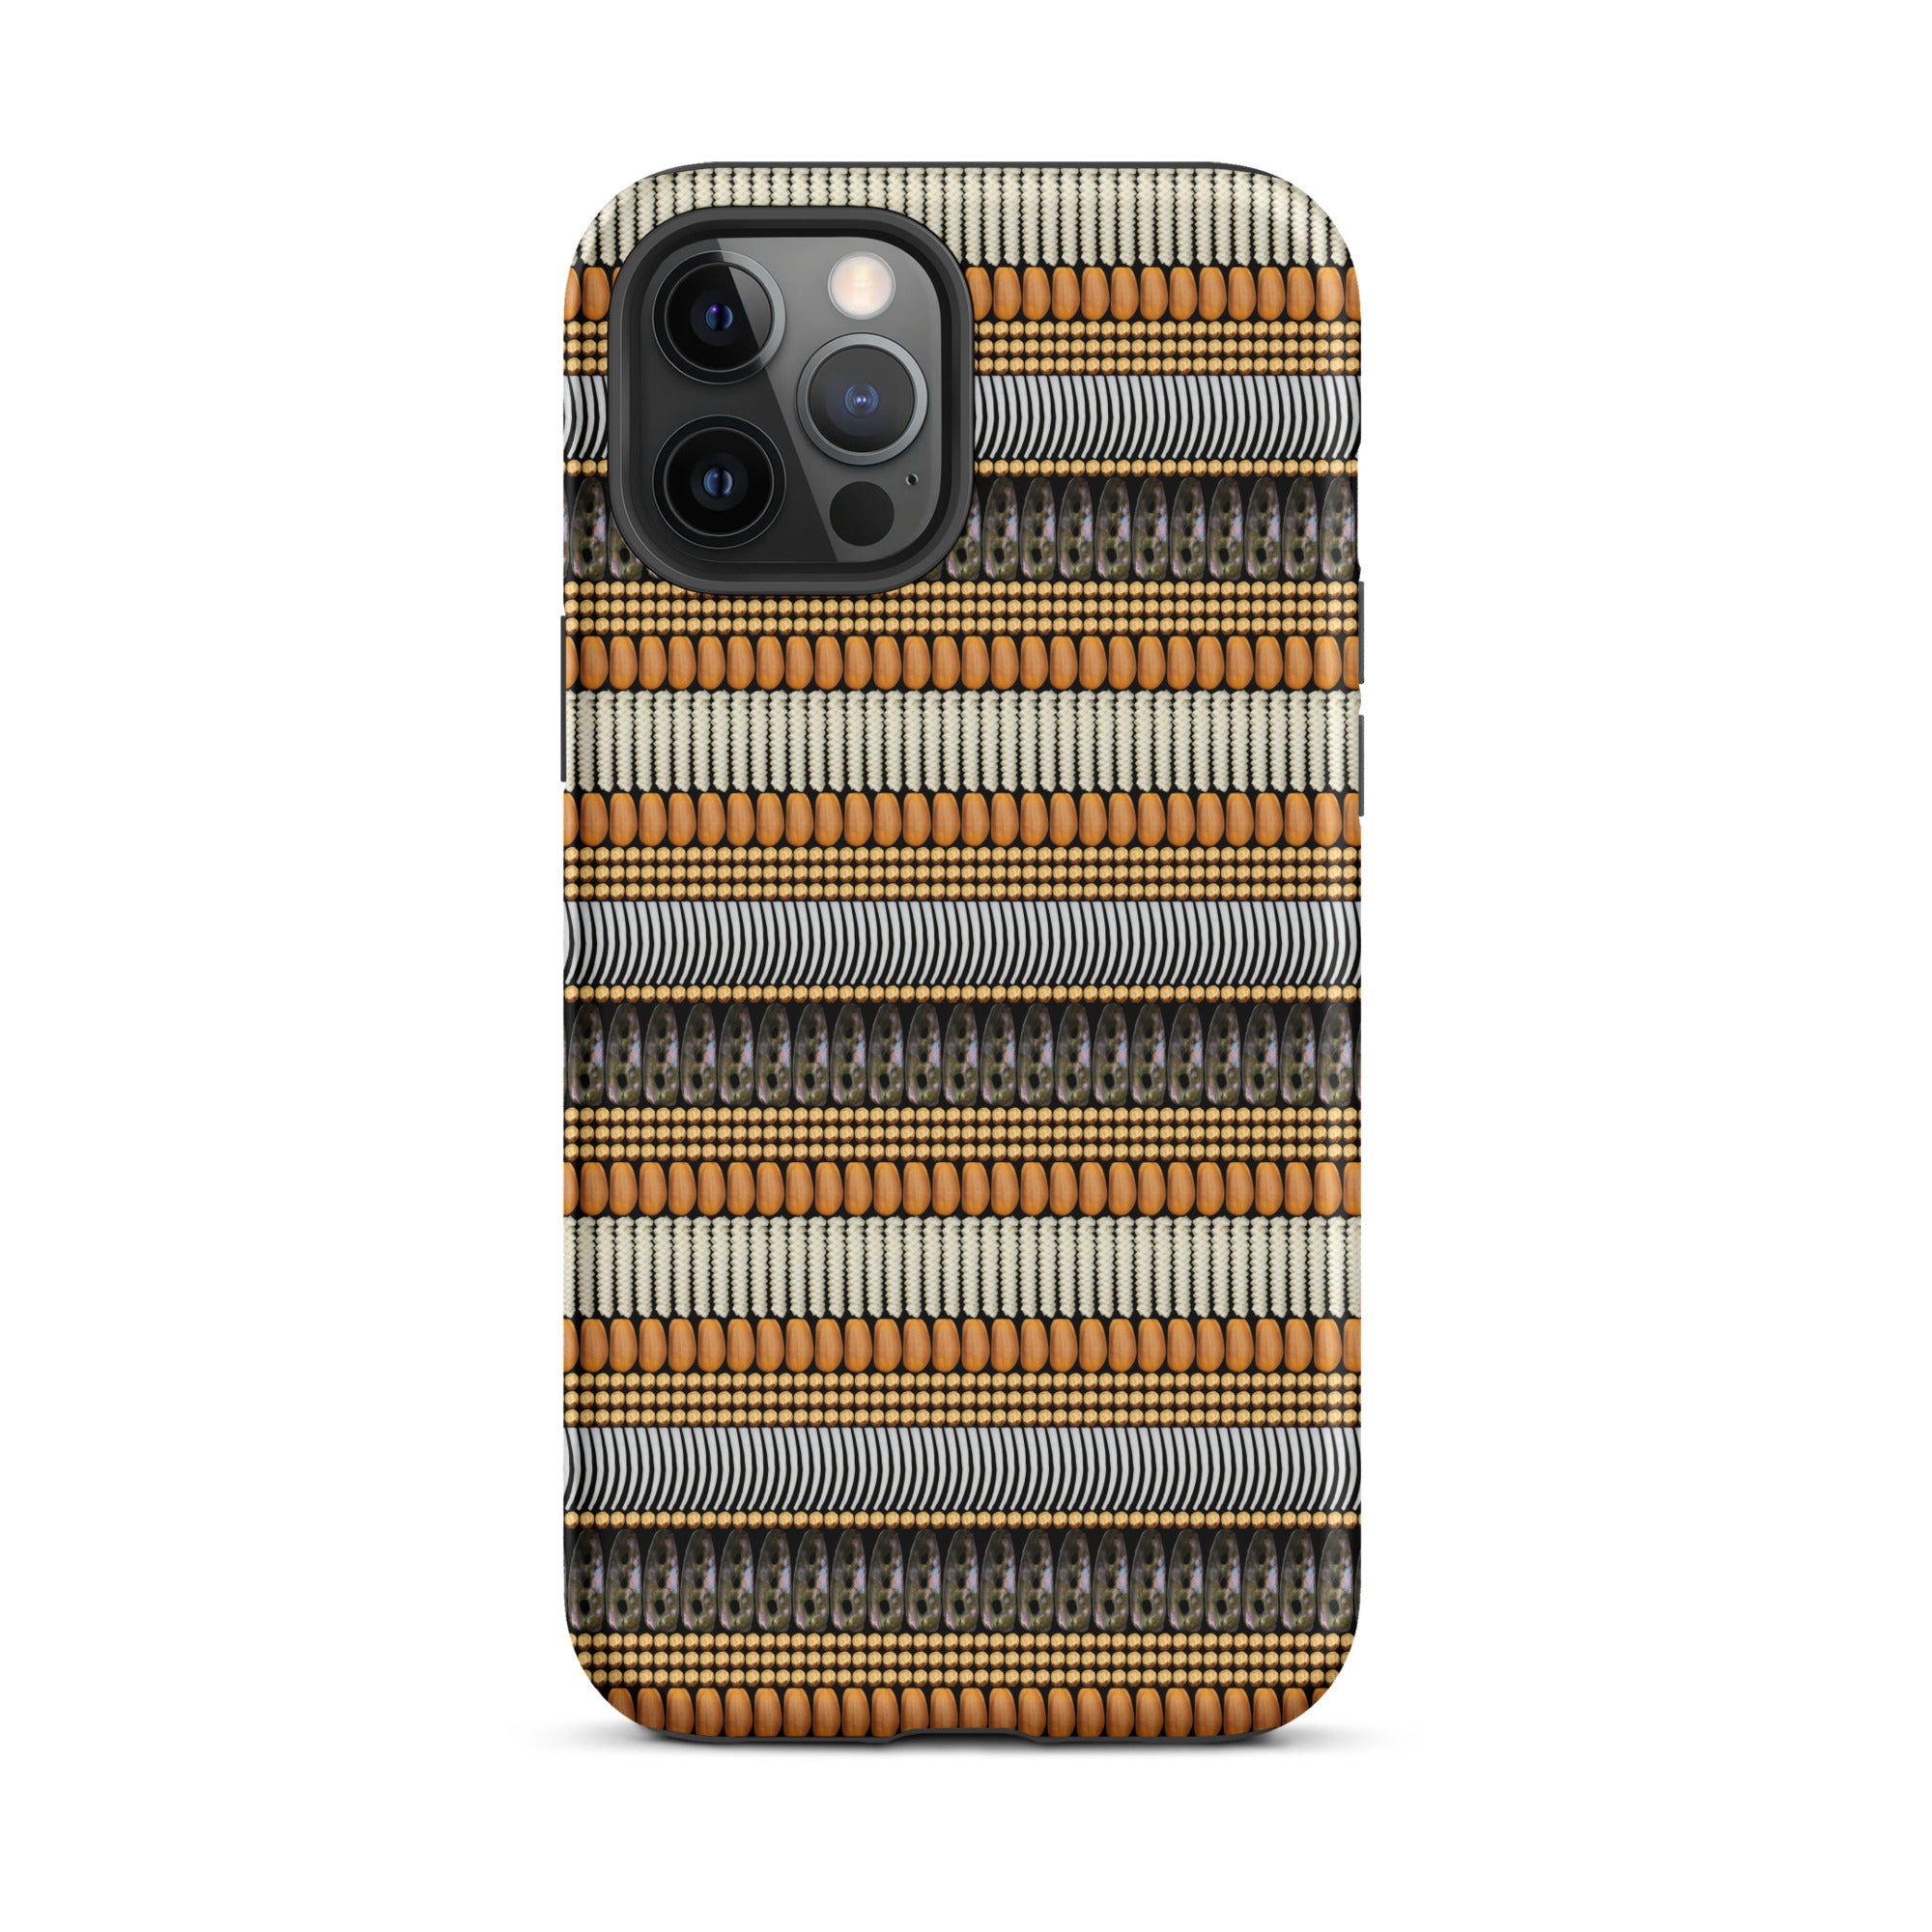 Tough Case for iPhone With Pinenuts, Beargrass, Dentalium, Abalone, and Cedar Berrie Image.